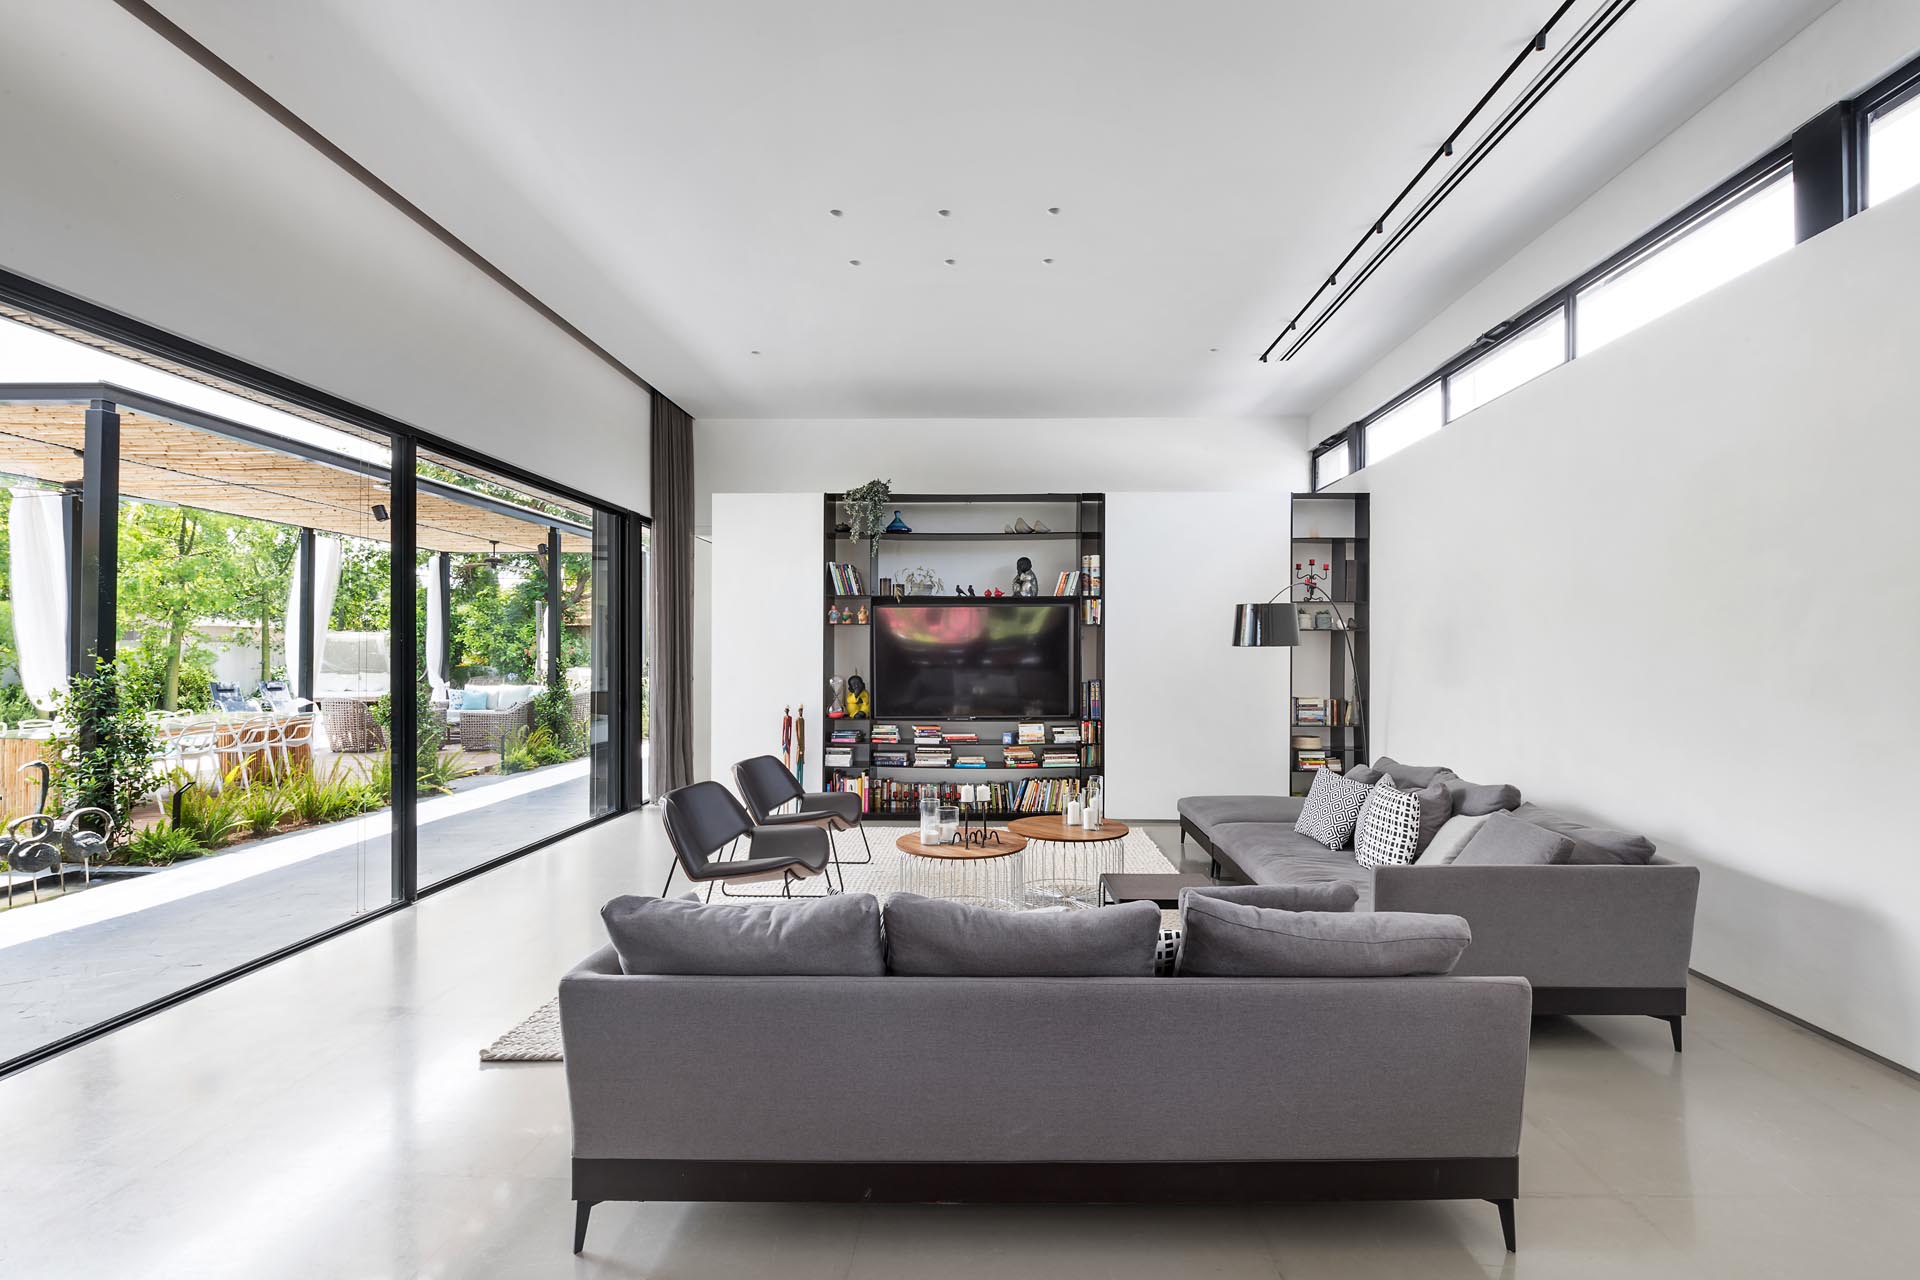 At one end of this modern great room is the living room, that includes a large sliding glass door that opens to the outdoor spaces.